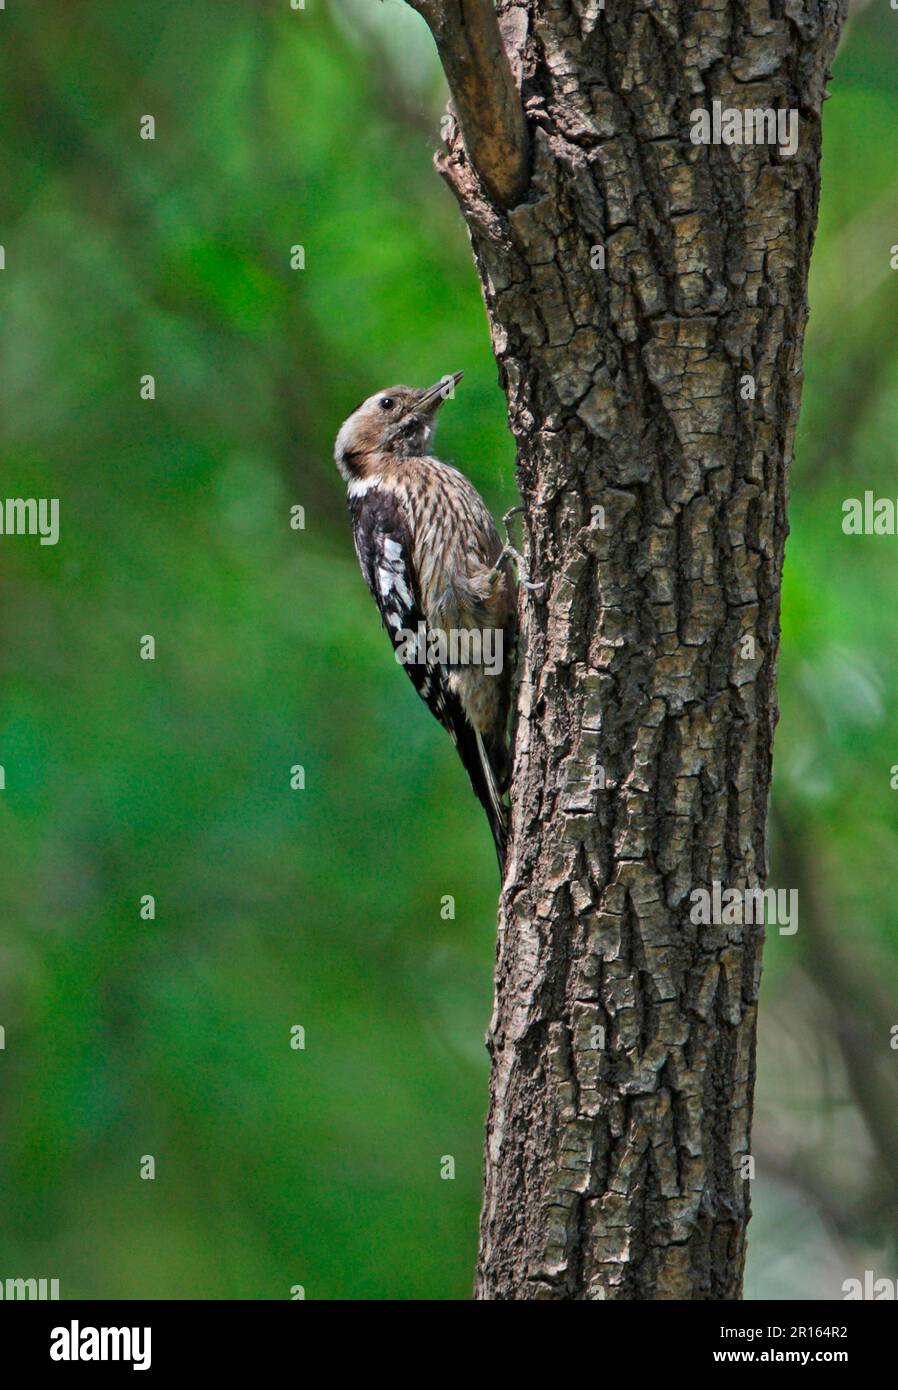 Grey-capped Woodpecker (Yungipicus canicapillus scintilliceps), adult female, clinging to tree trunk, Beidaihe, Hebei, China Stock Photo